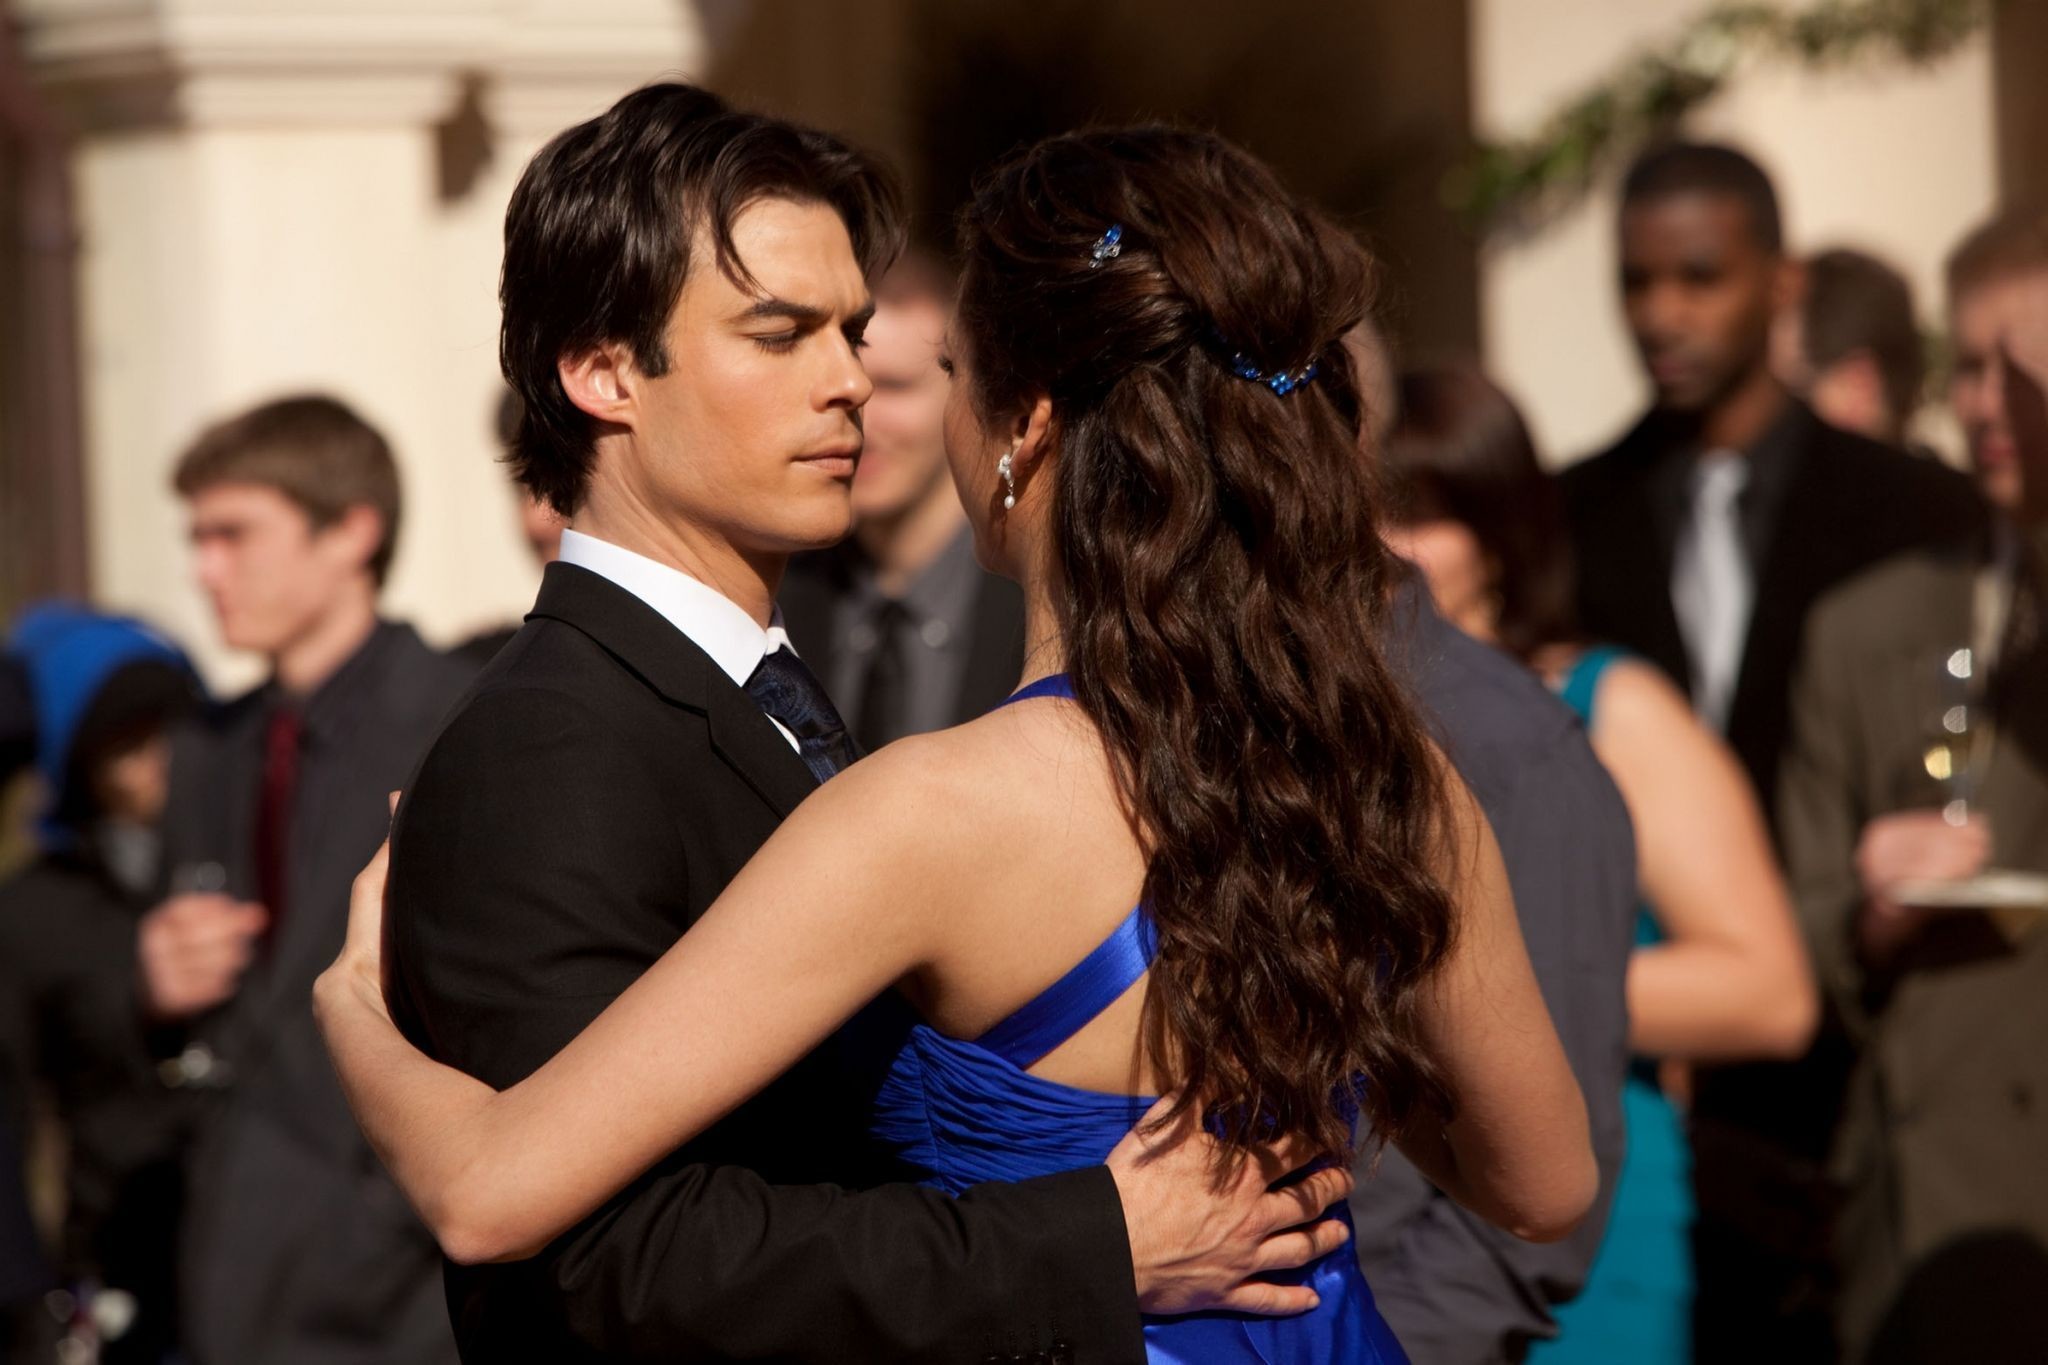 2048x1365 All The Vampire Diaries Couples images damon and elena HD wallpaper and  background photos